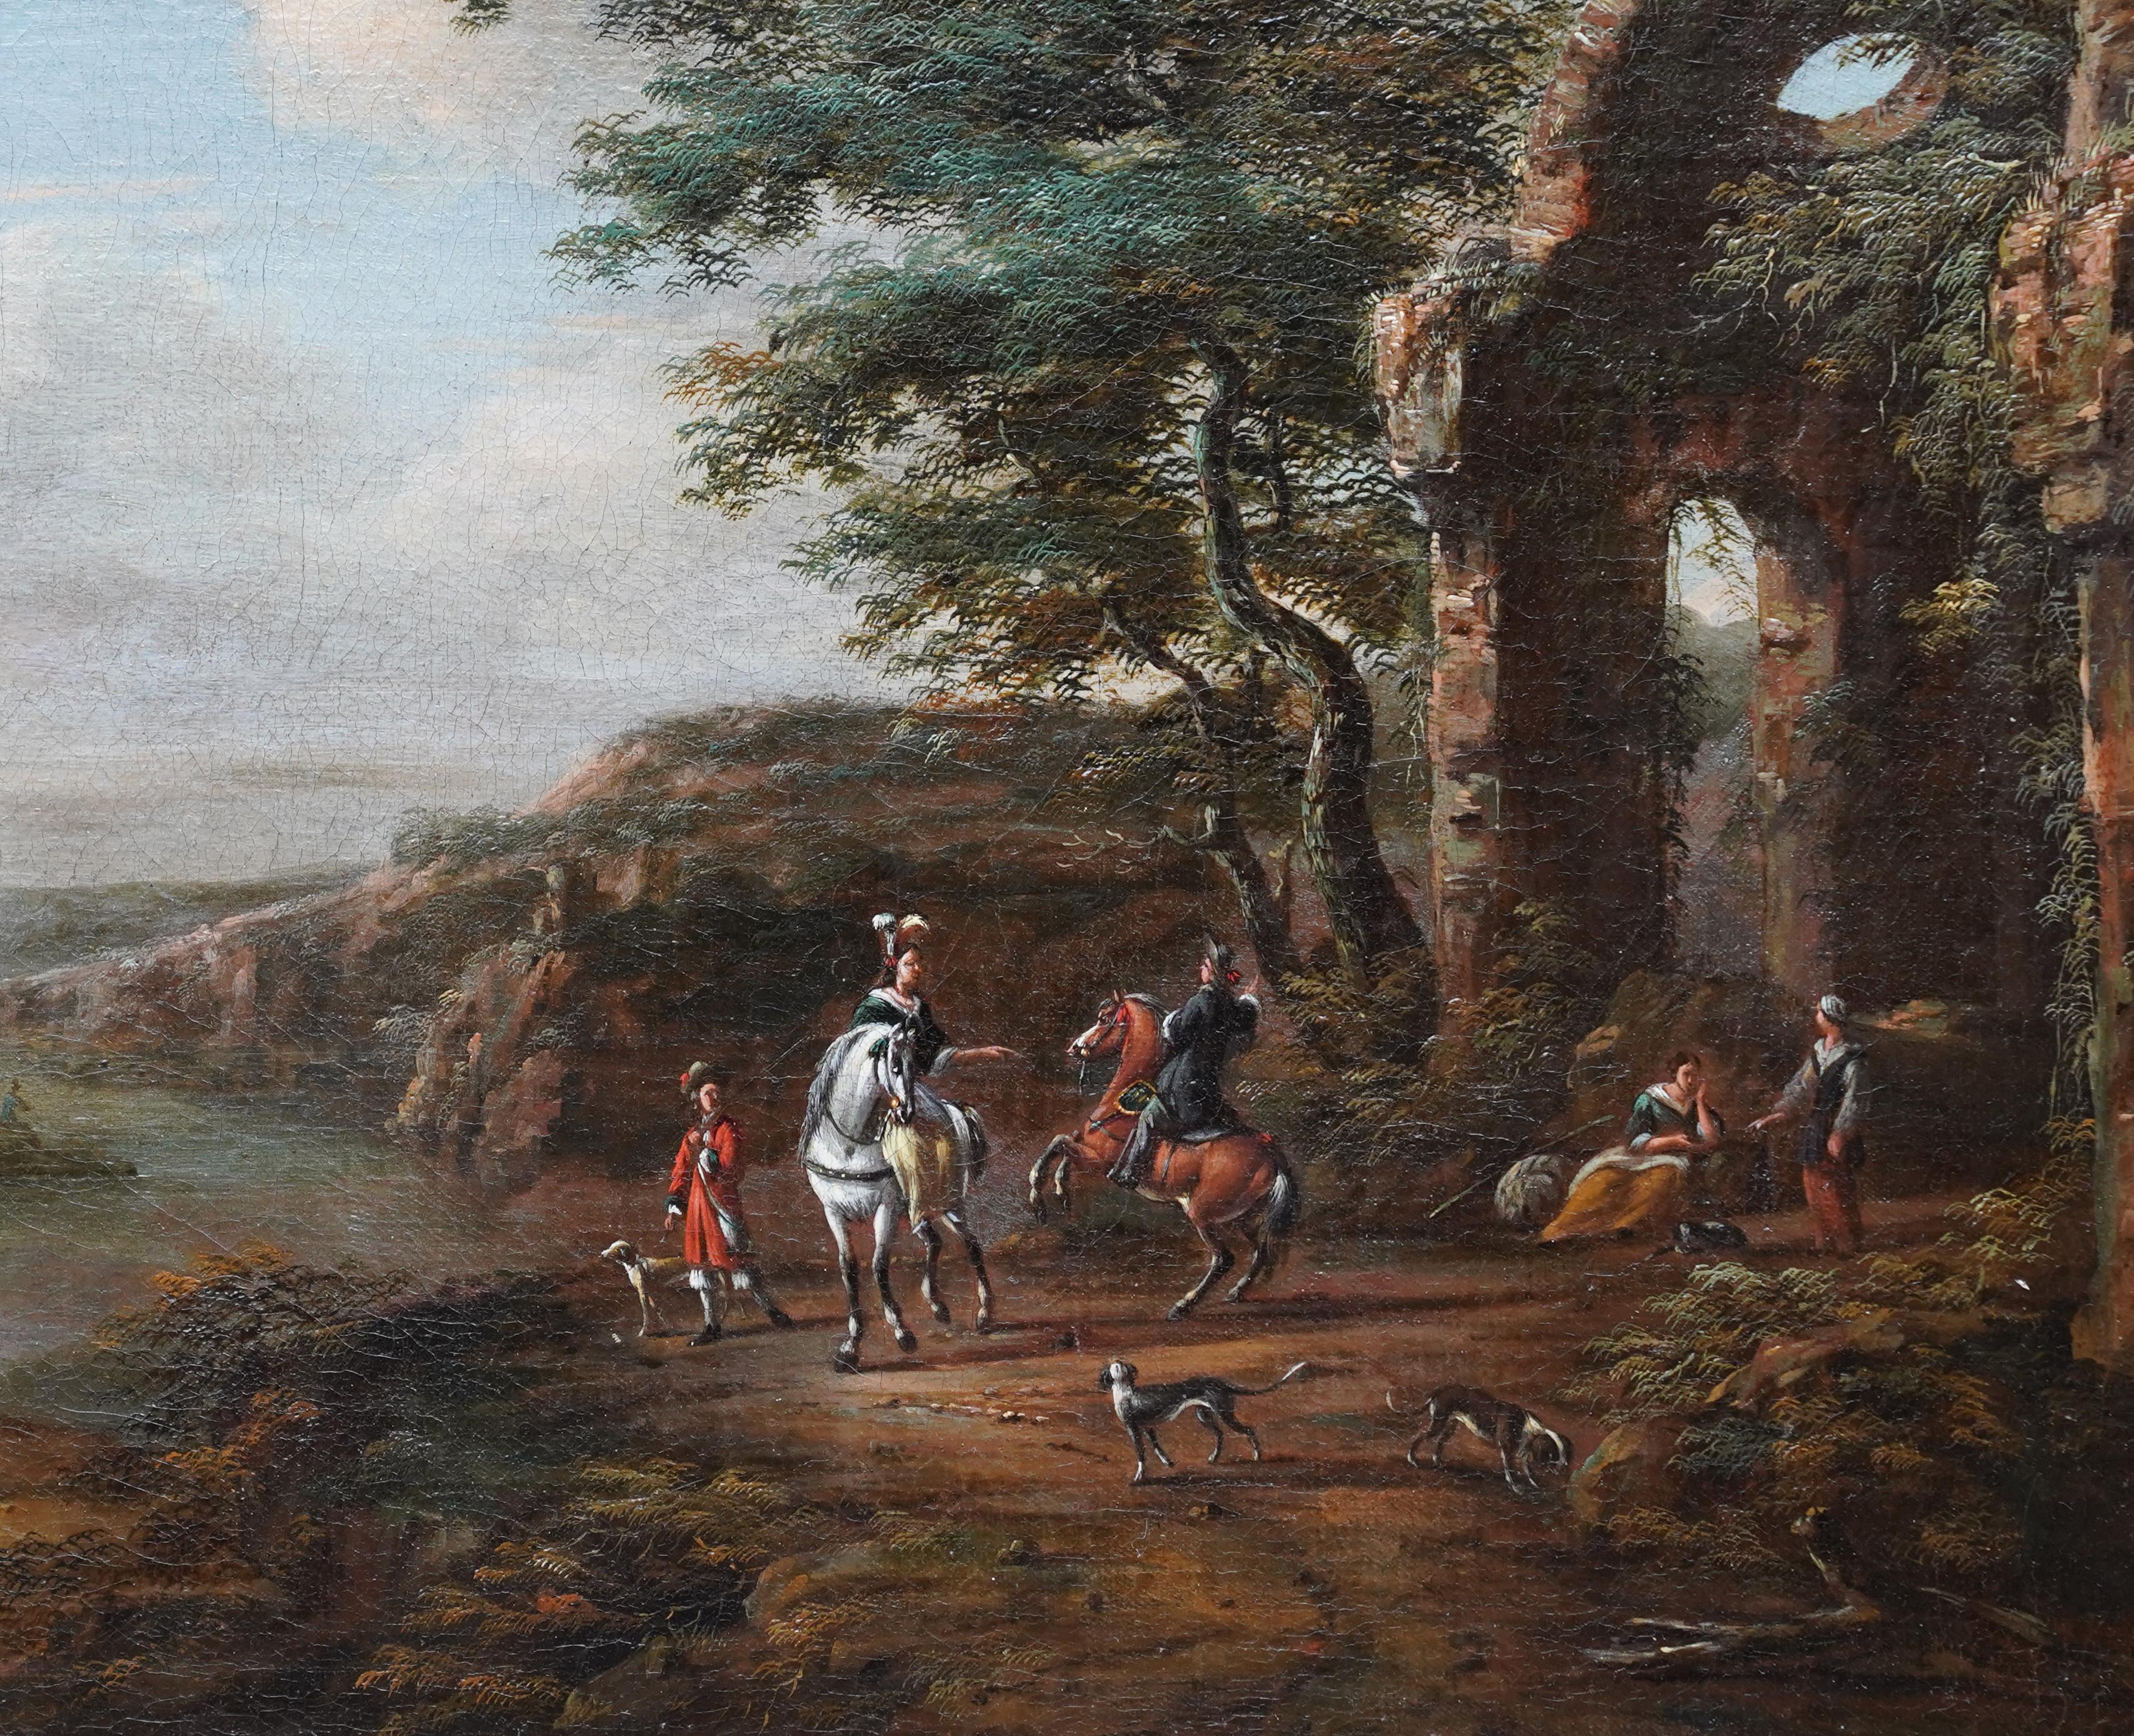 Travellers and Dogs in Landscape, Ruins on Right - Dutch Old Master oil painting - Old Masters Painting by Pieter Wouwerman